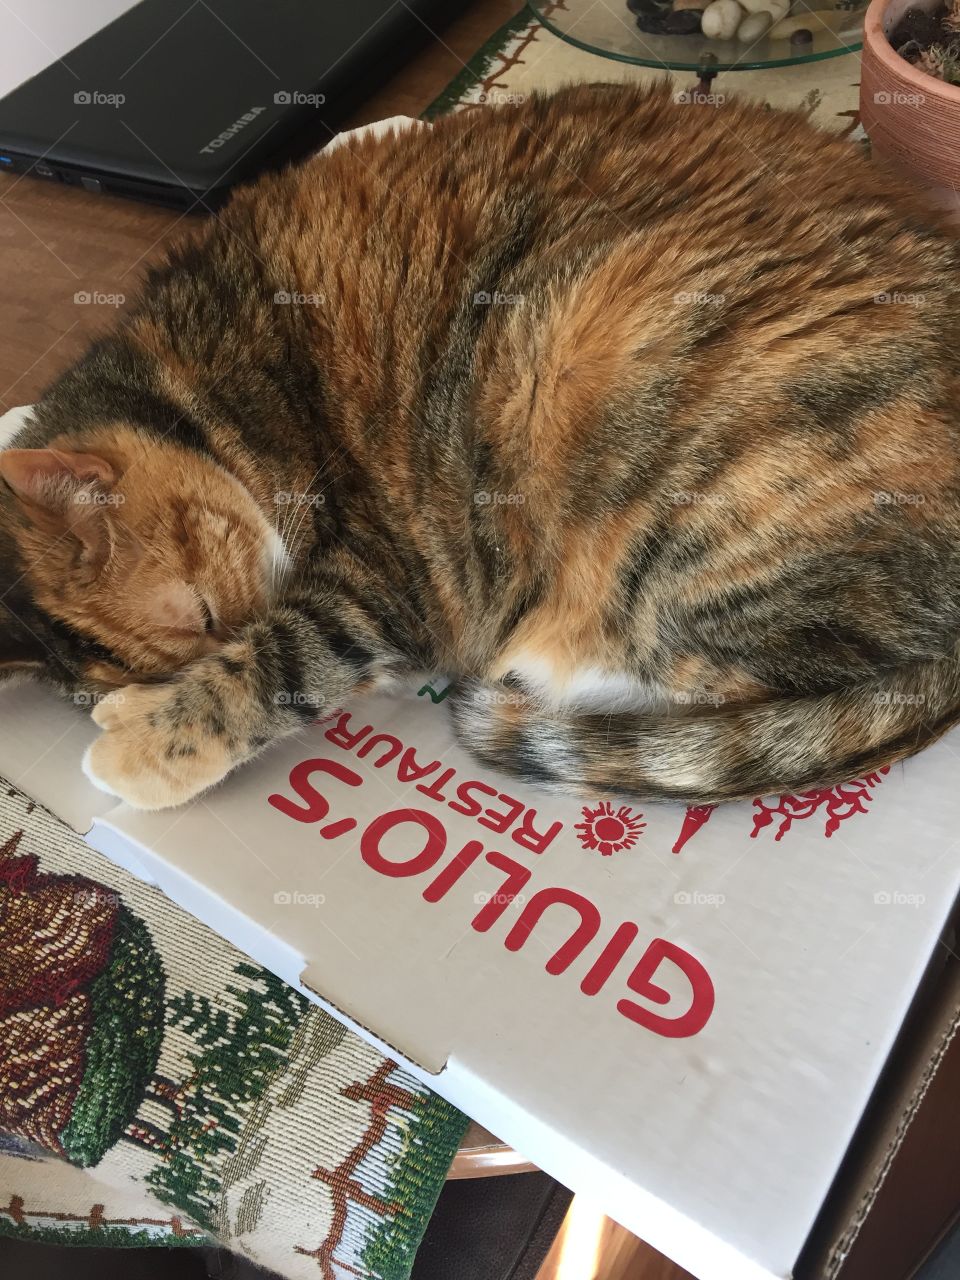 When you’re never allowed to throw your pizza boxes away before Ms. Kitty naps on it. She must love pizza🤷🏻‍♀️